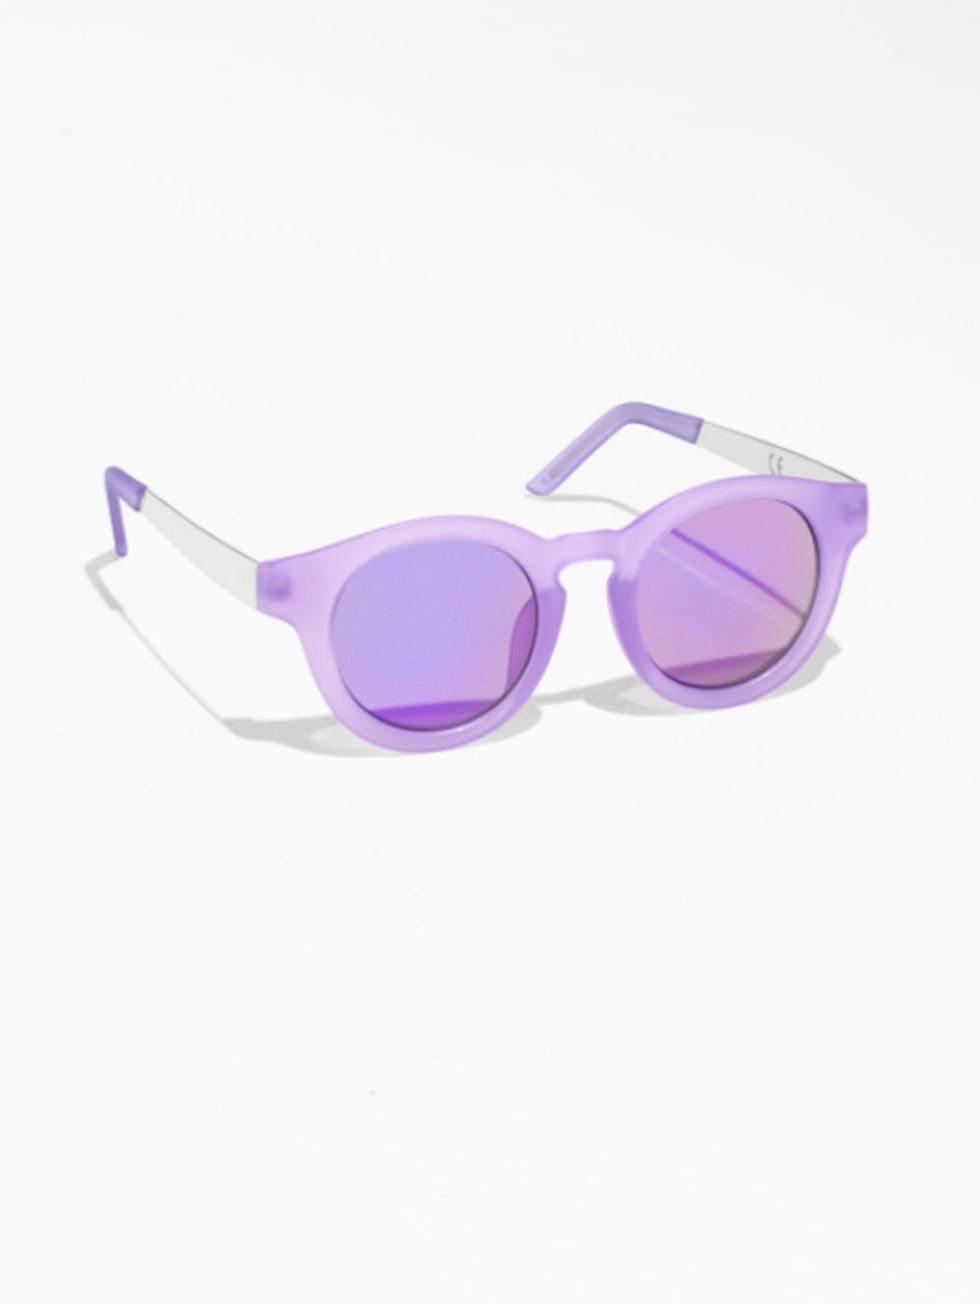 Eyewear, Sunglasses, Glasses, Violet, Purple, White, Personal protective equipment, Lilac, Vision care, Lavender, 